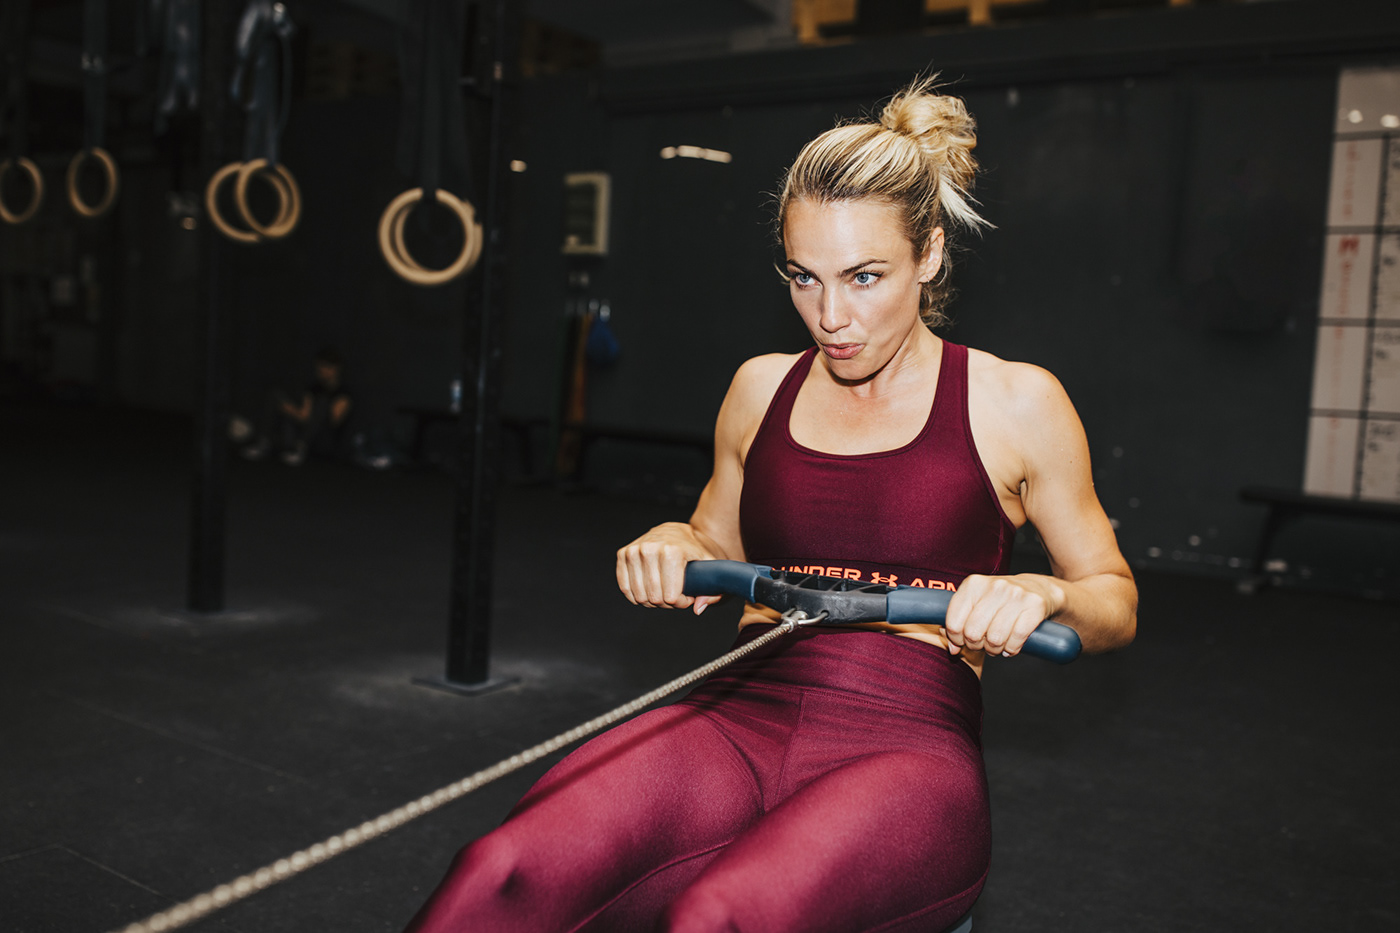 fitness FIT workout strength Crossfit Under Armour women power strong women strong